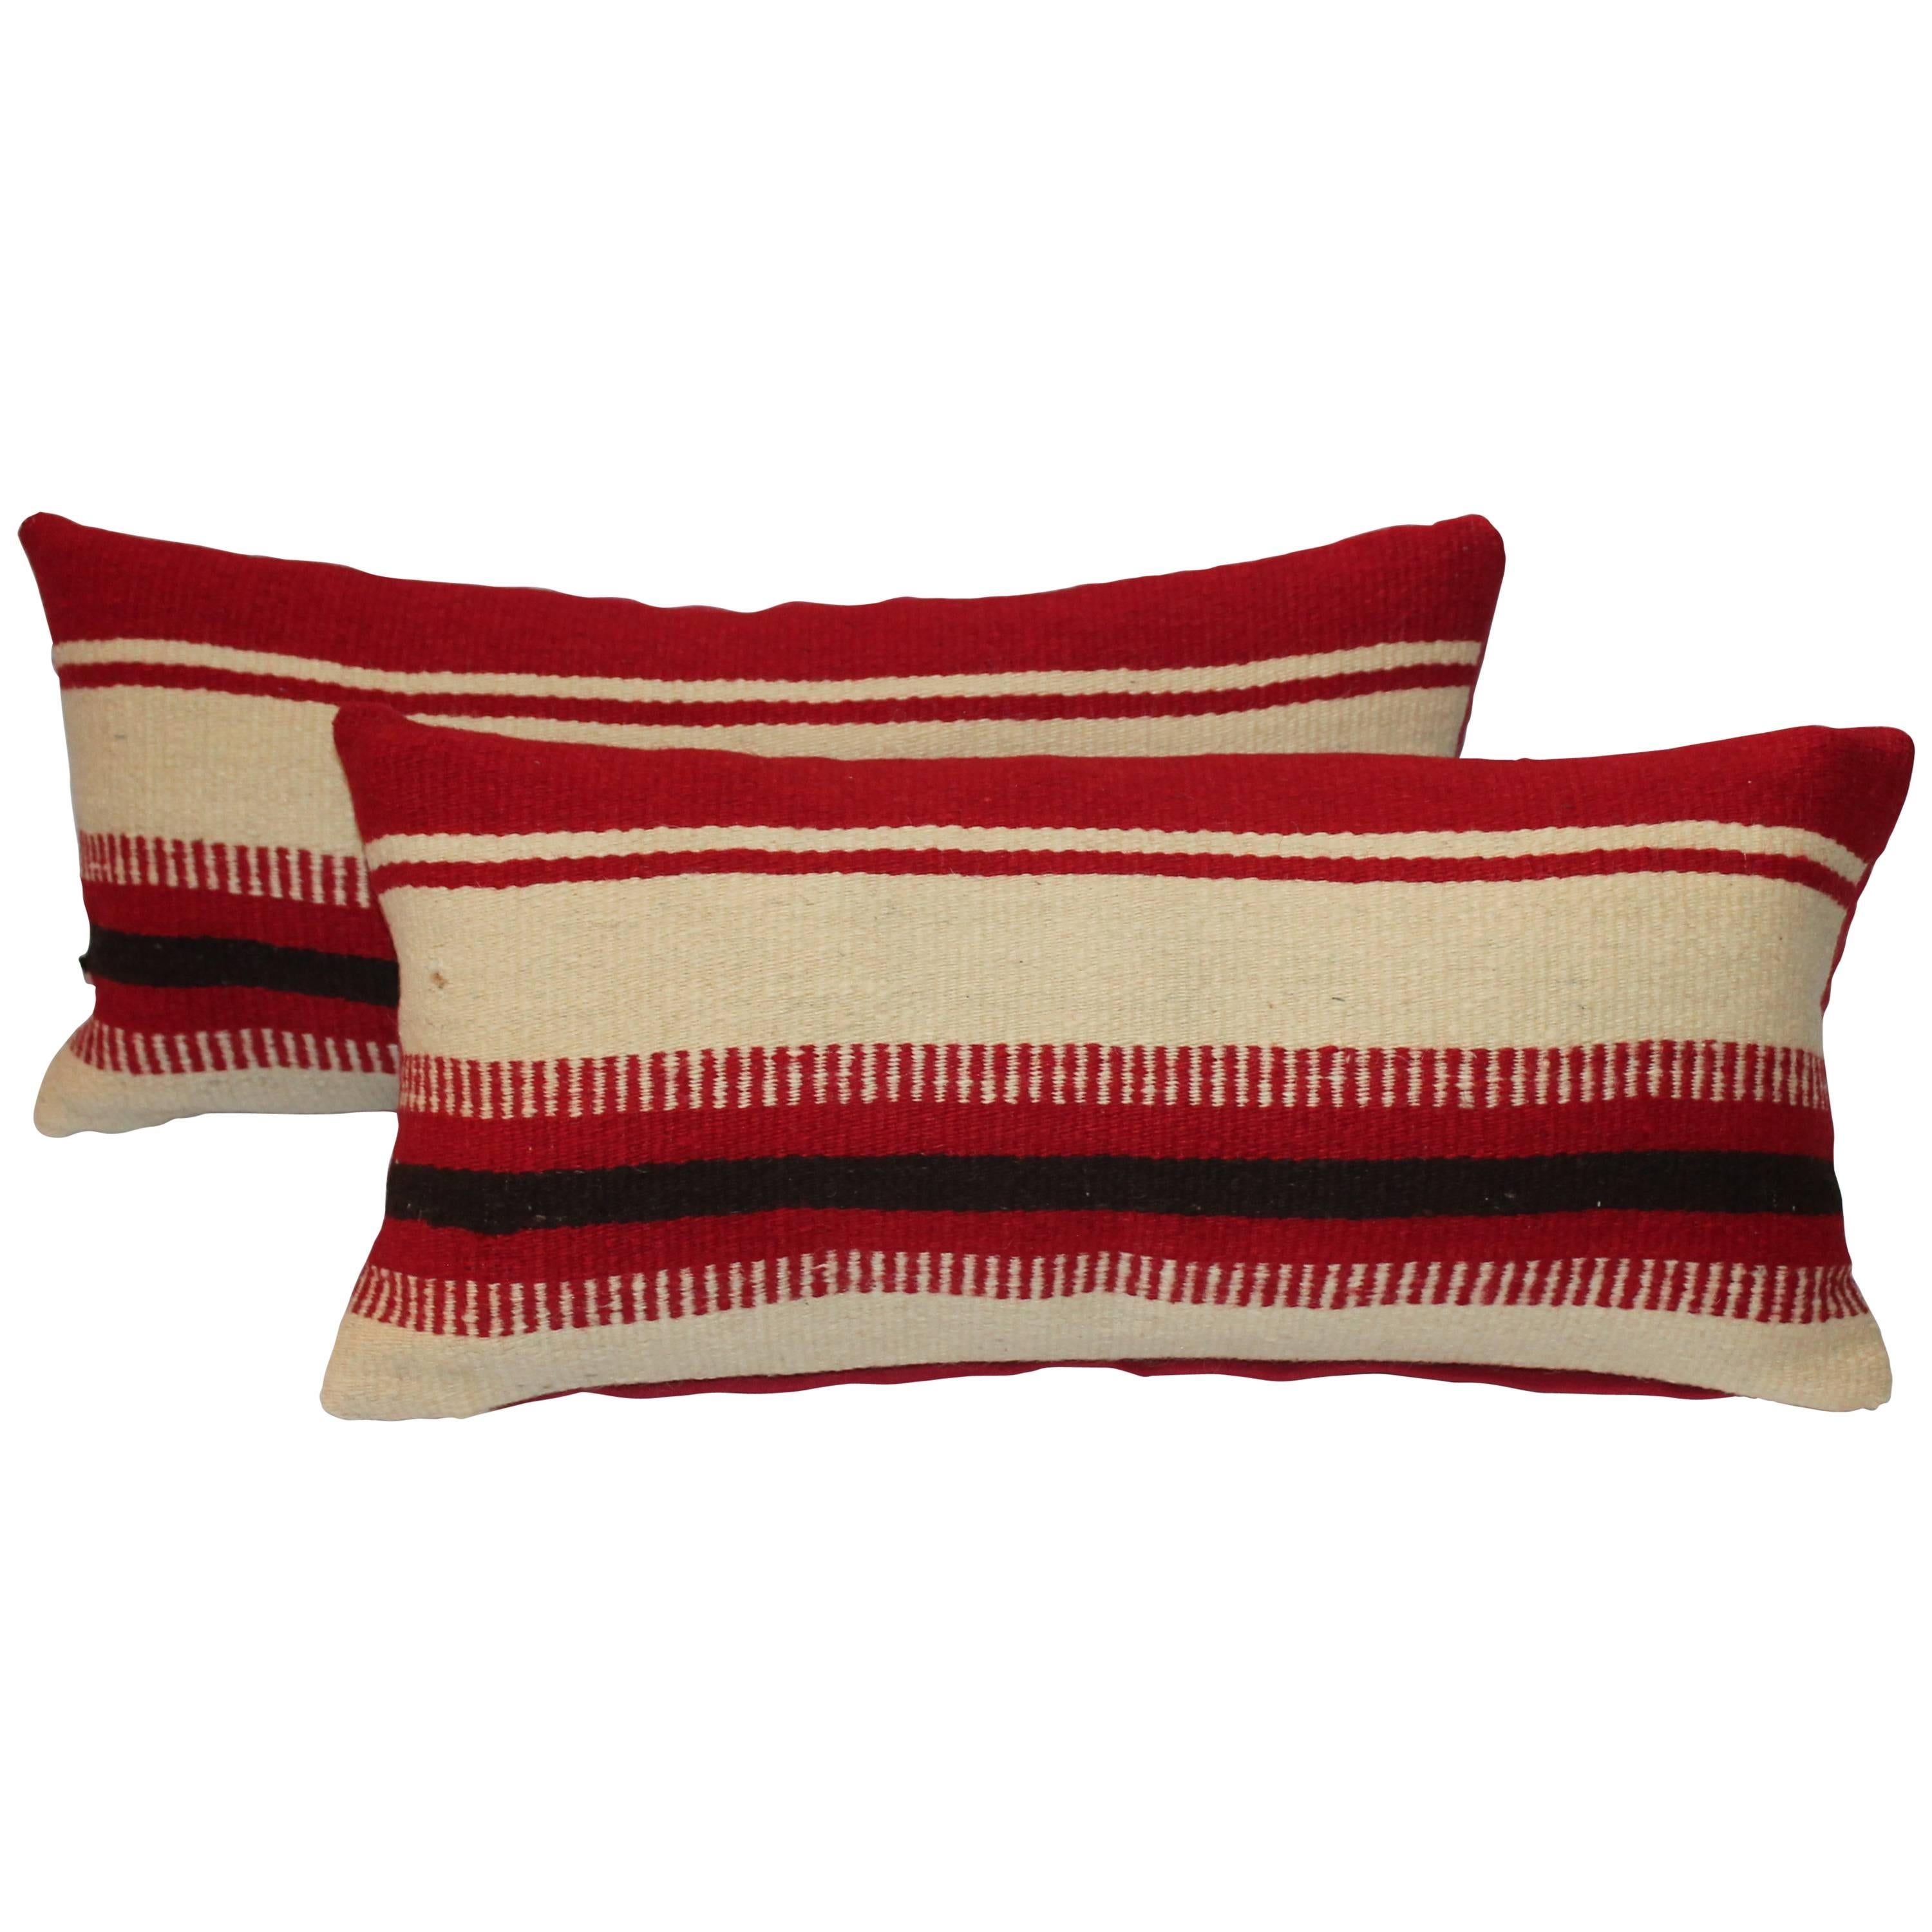 Pair of Mexican Indian Weaving Striped Bolster Pillows